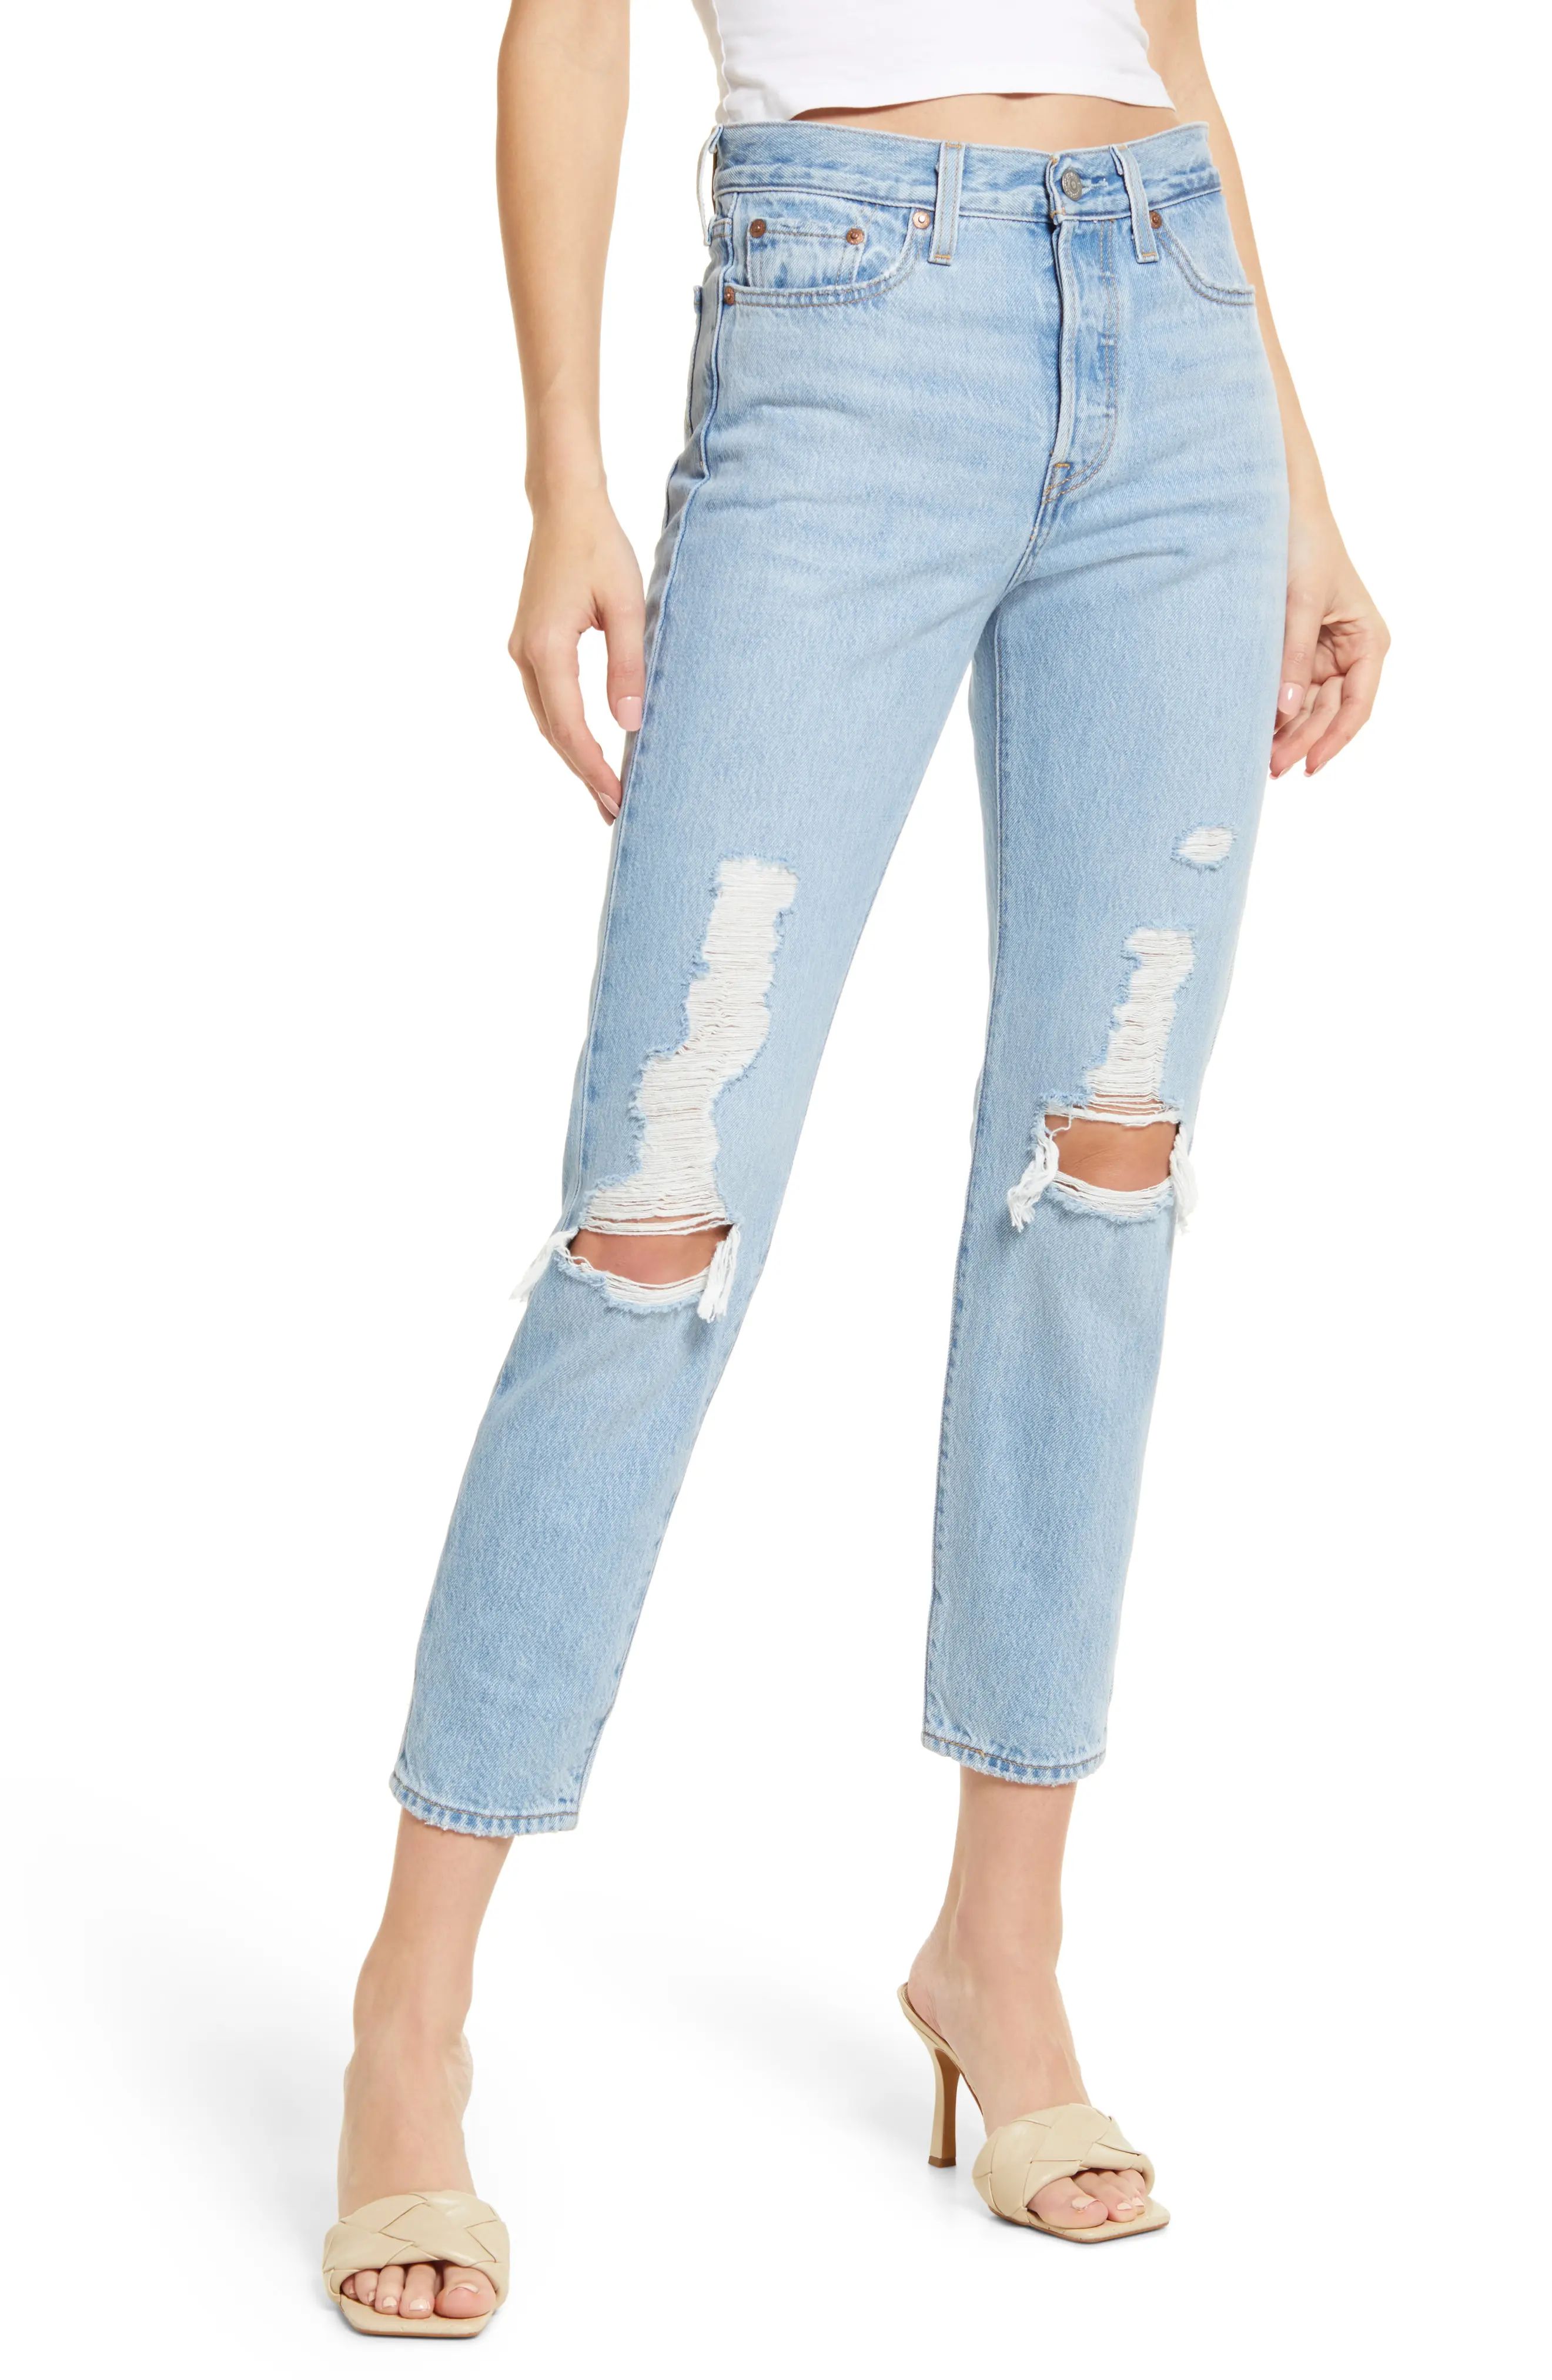 levi's Wedgie Icon Fit Ripped High Waist Jeans in Luxor Found Out at Nordstrom, Size 26 | Nordstrom